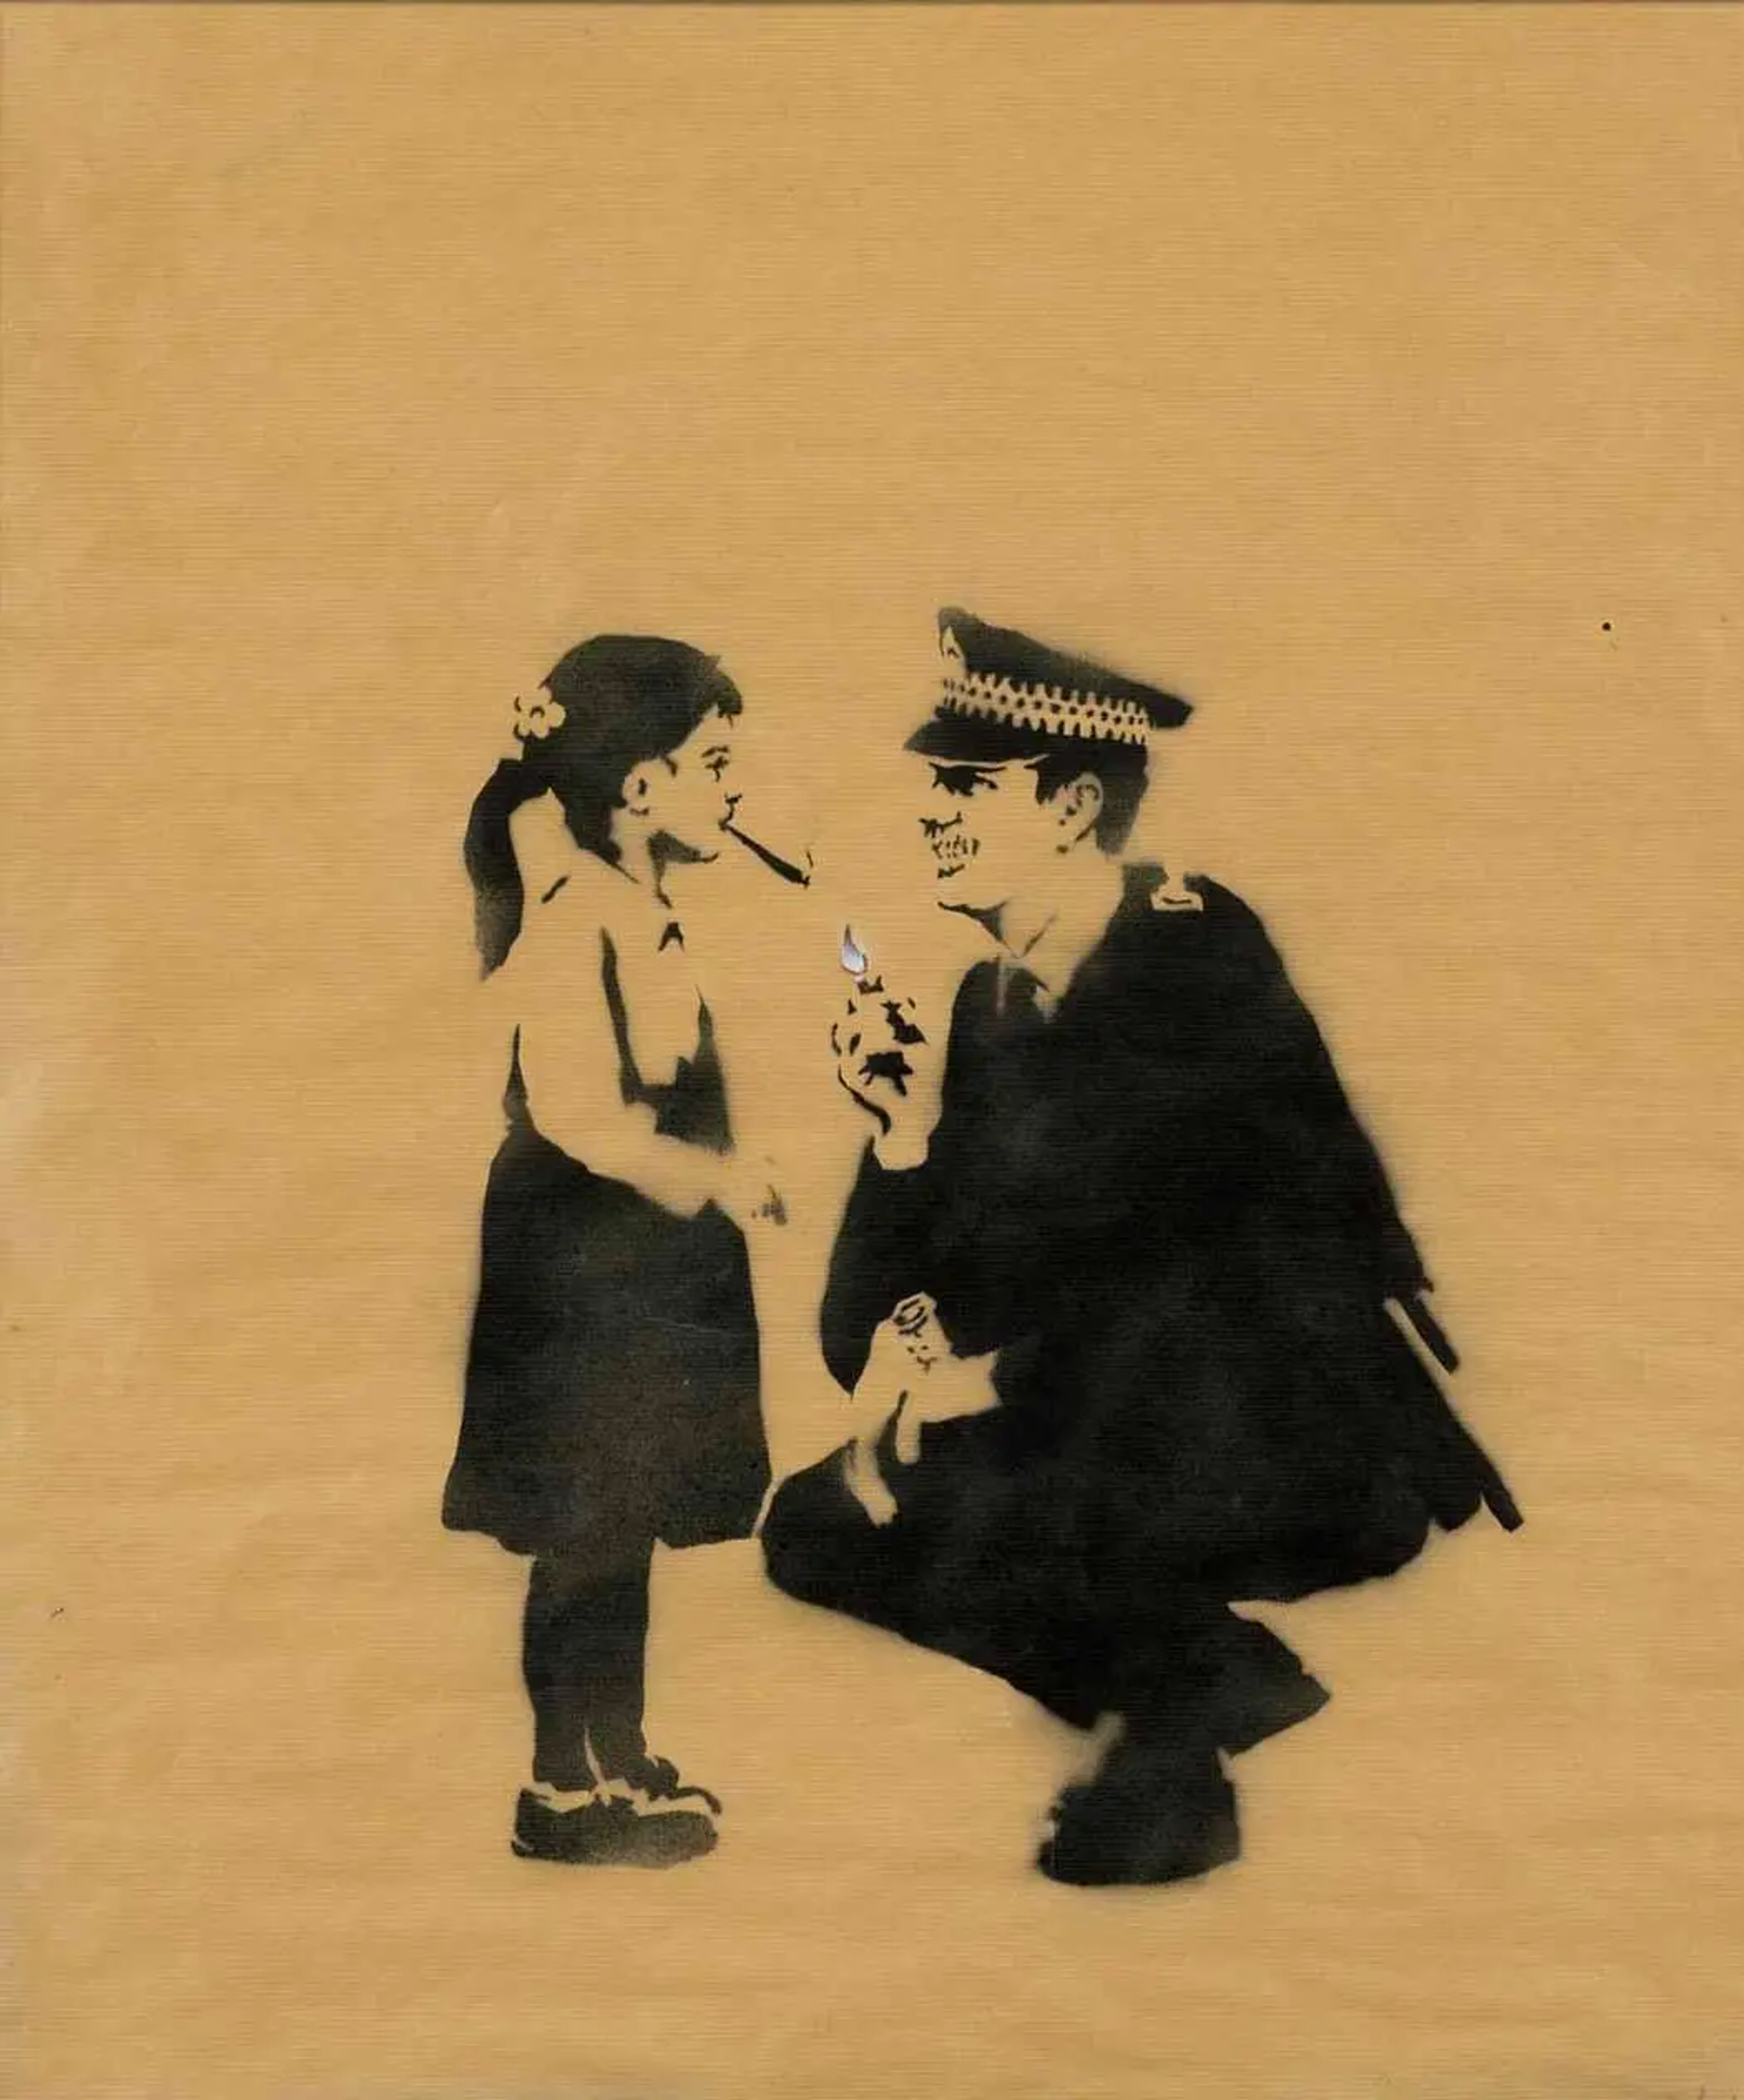 Lost Children (Glastonbury Festival) (2005) is a signed spray painting by Banksy, which depicts a grinning policeman as he kneels down to help a young girl light up a spliff. 